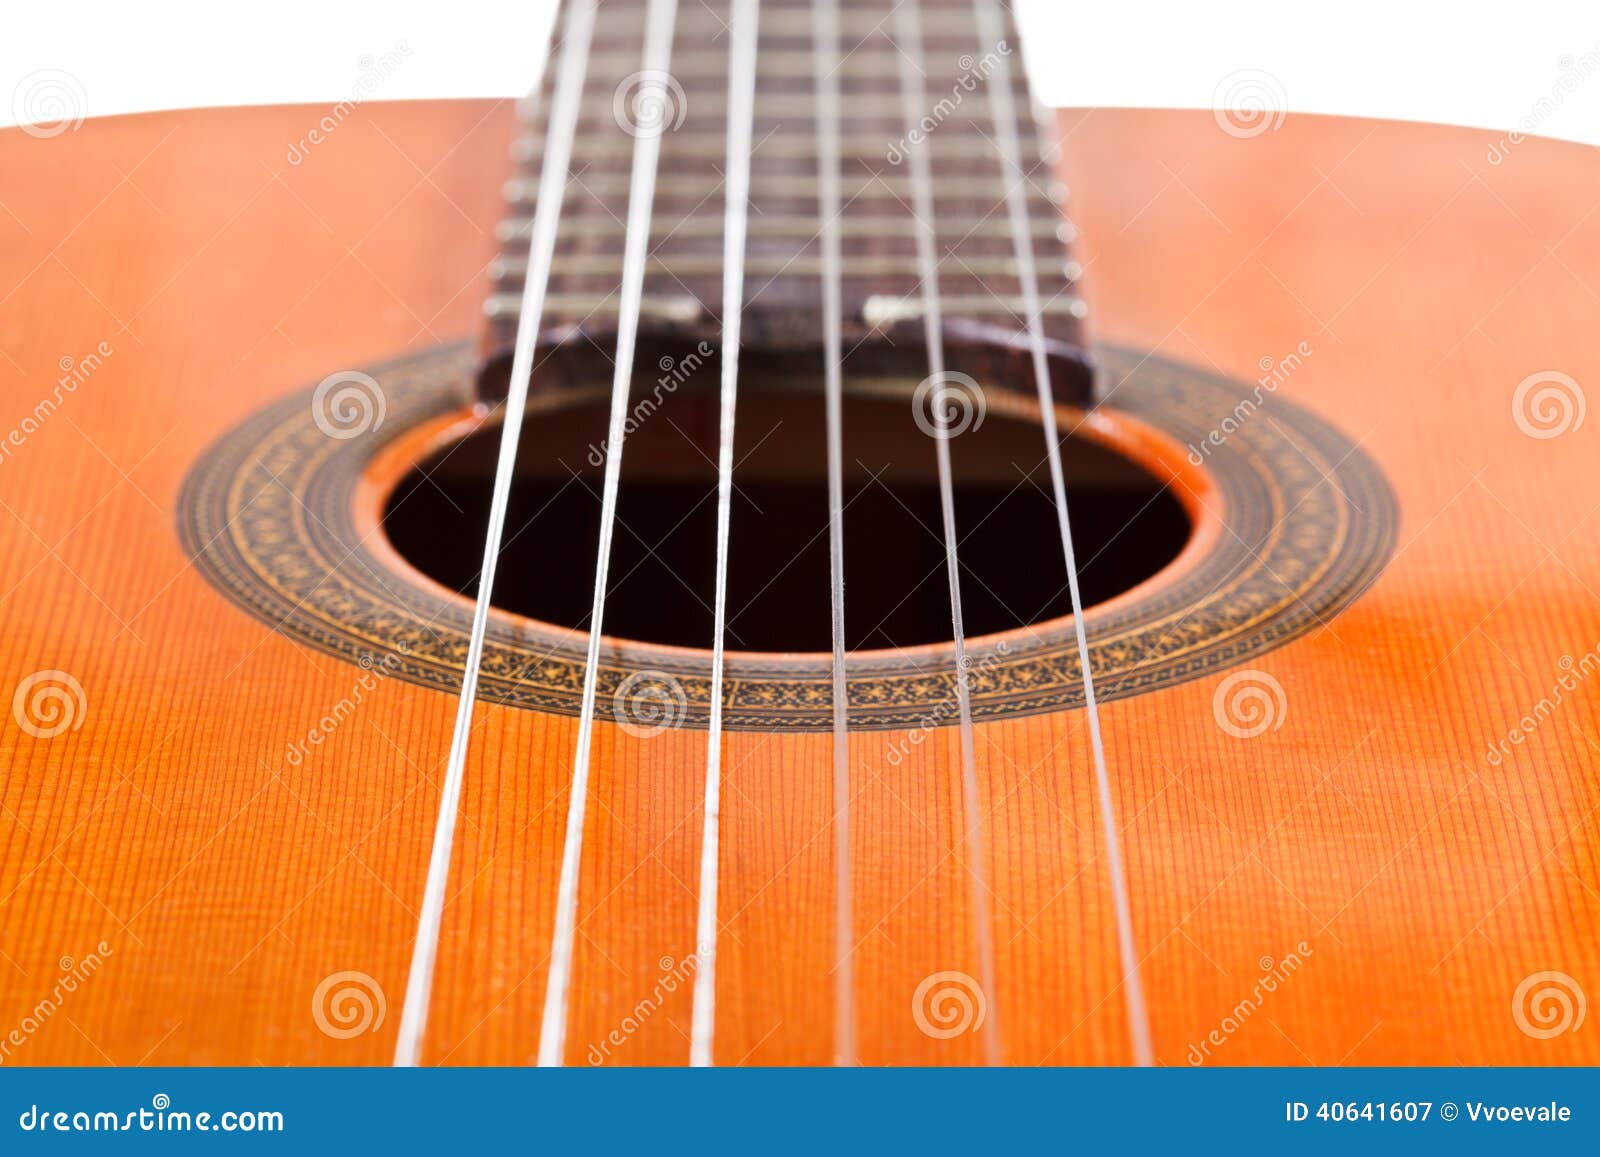 Six Nylon Strings of Classical Acoustic Guitar Stock Image - Image of  modern, string: 40641607